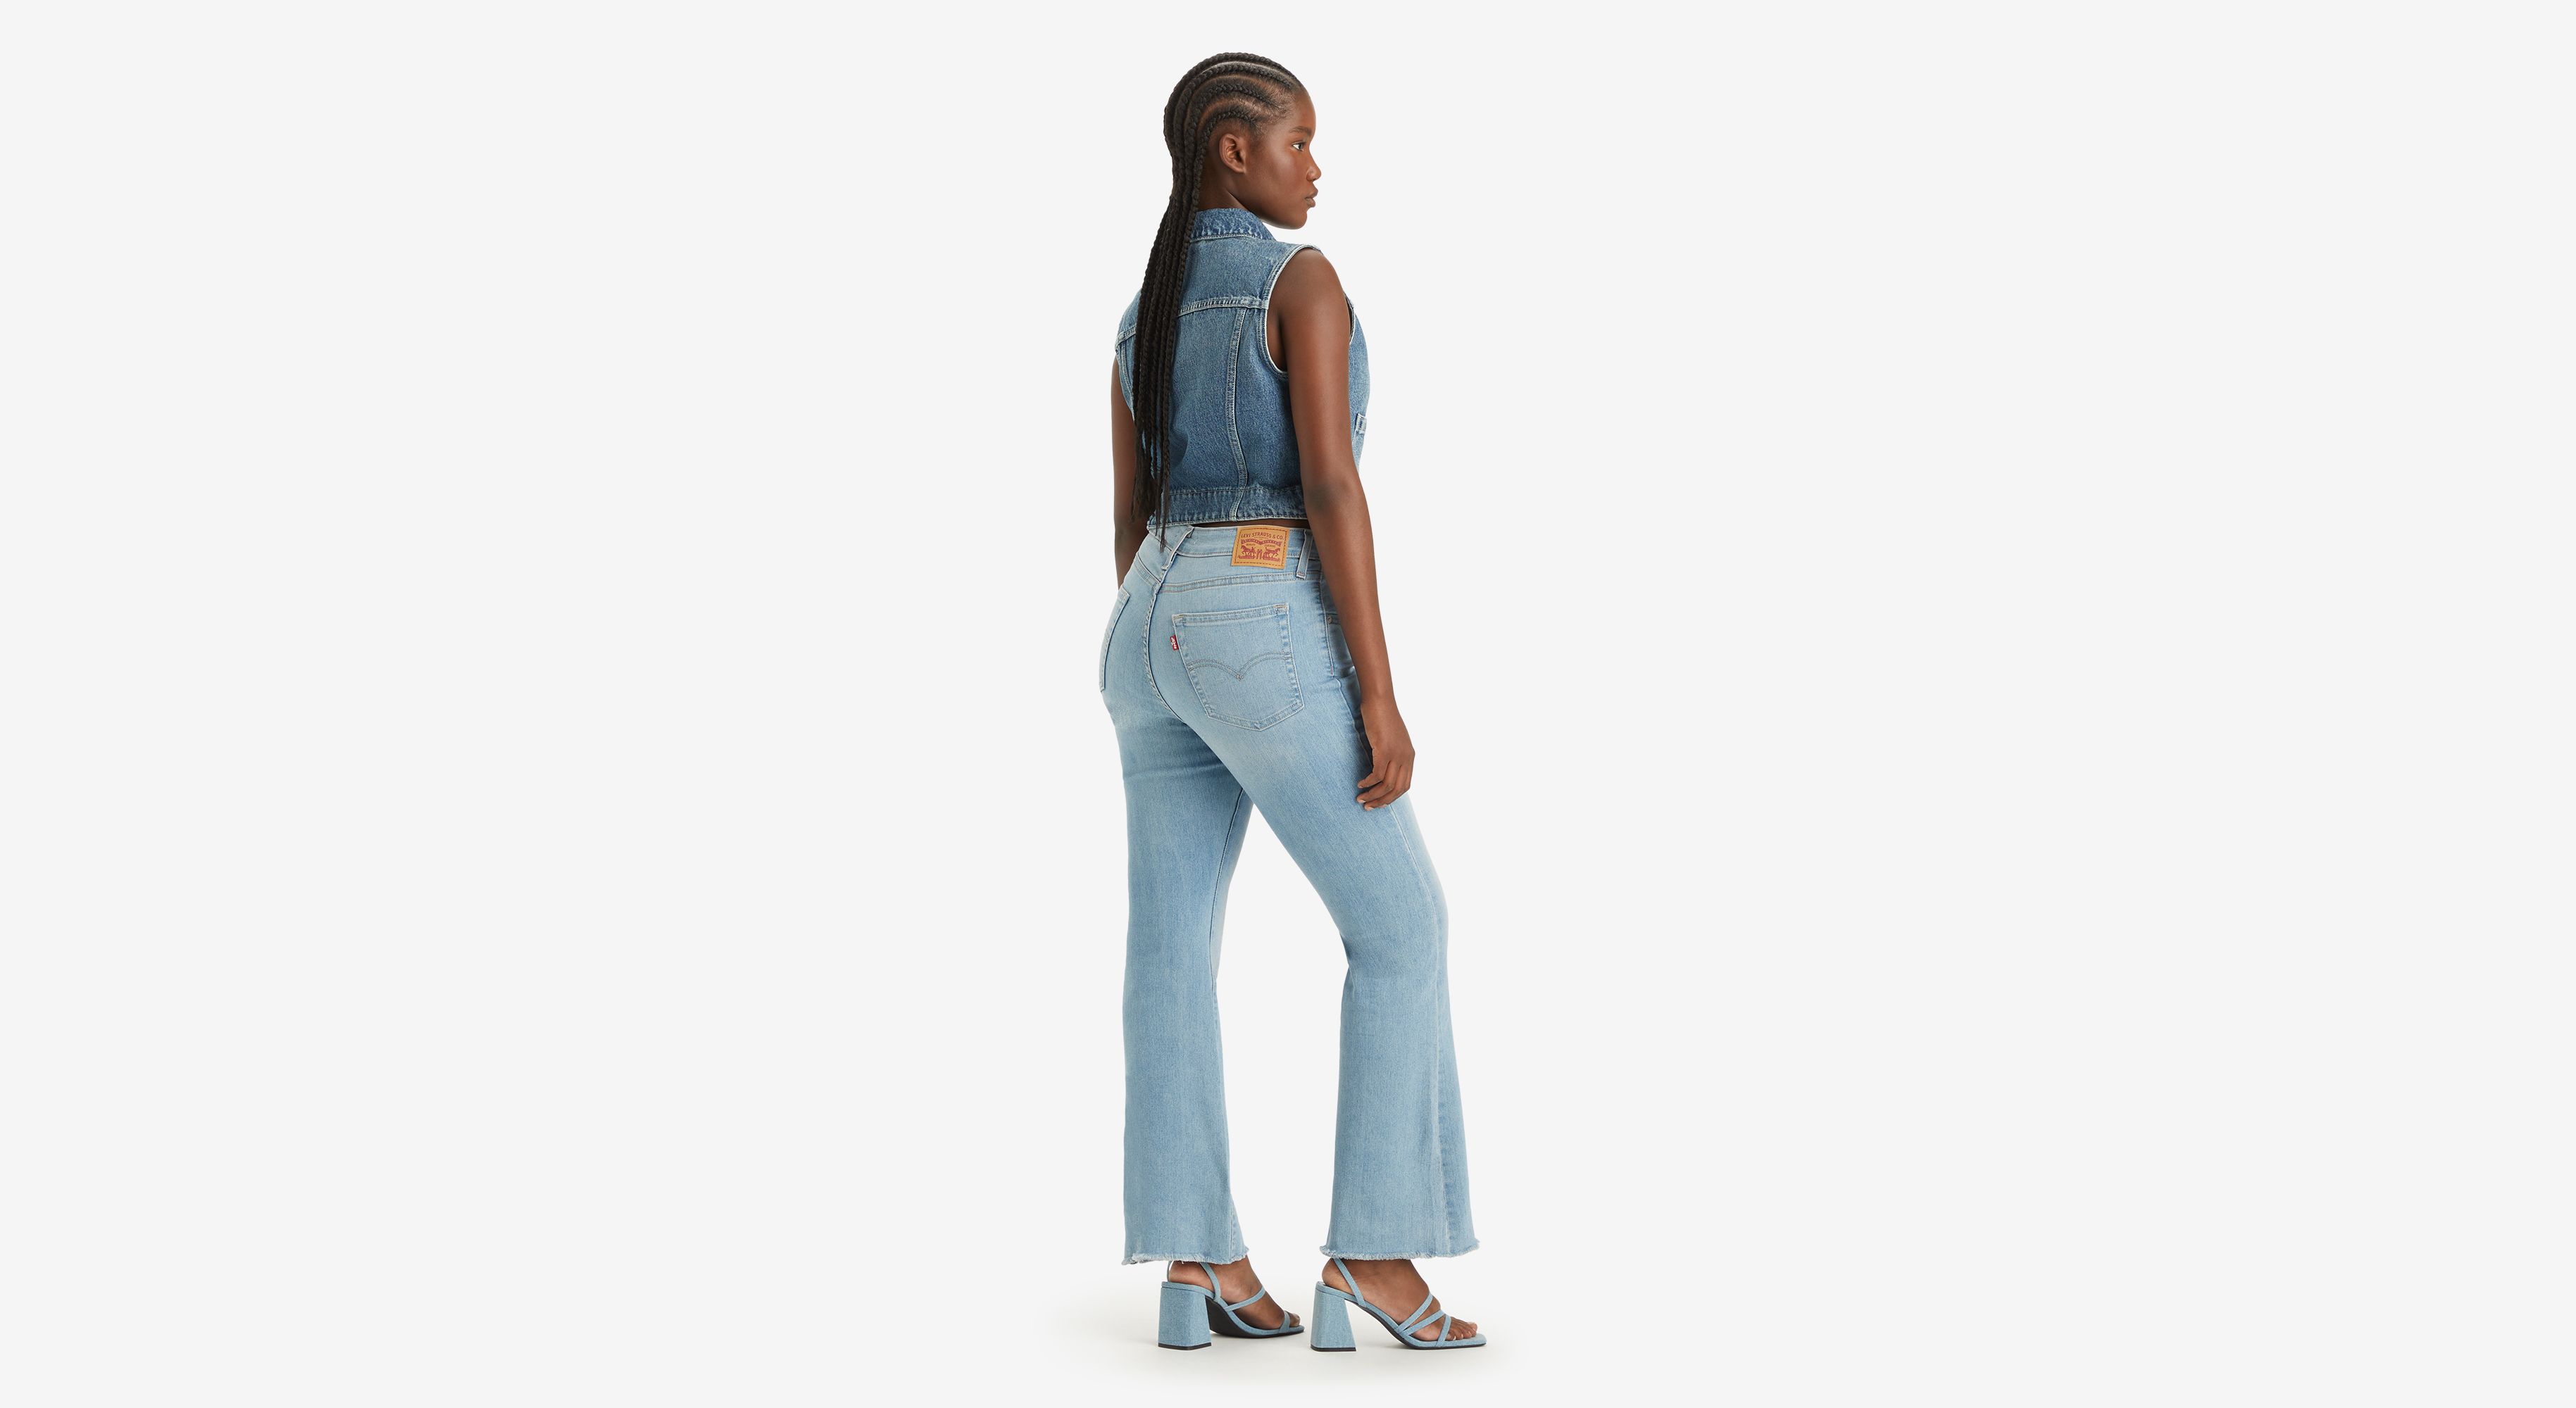 Levis Flare Jeans Womens, Flare Jeans Full Length